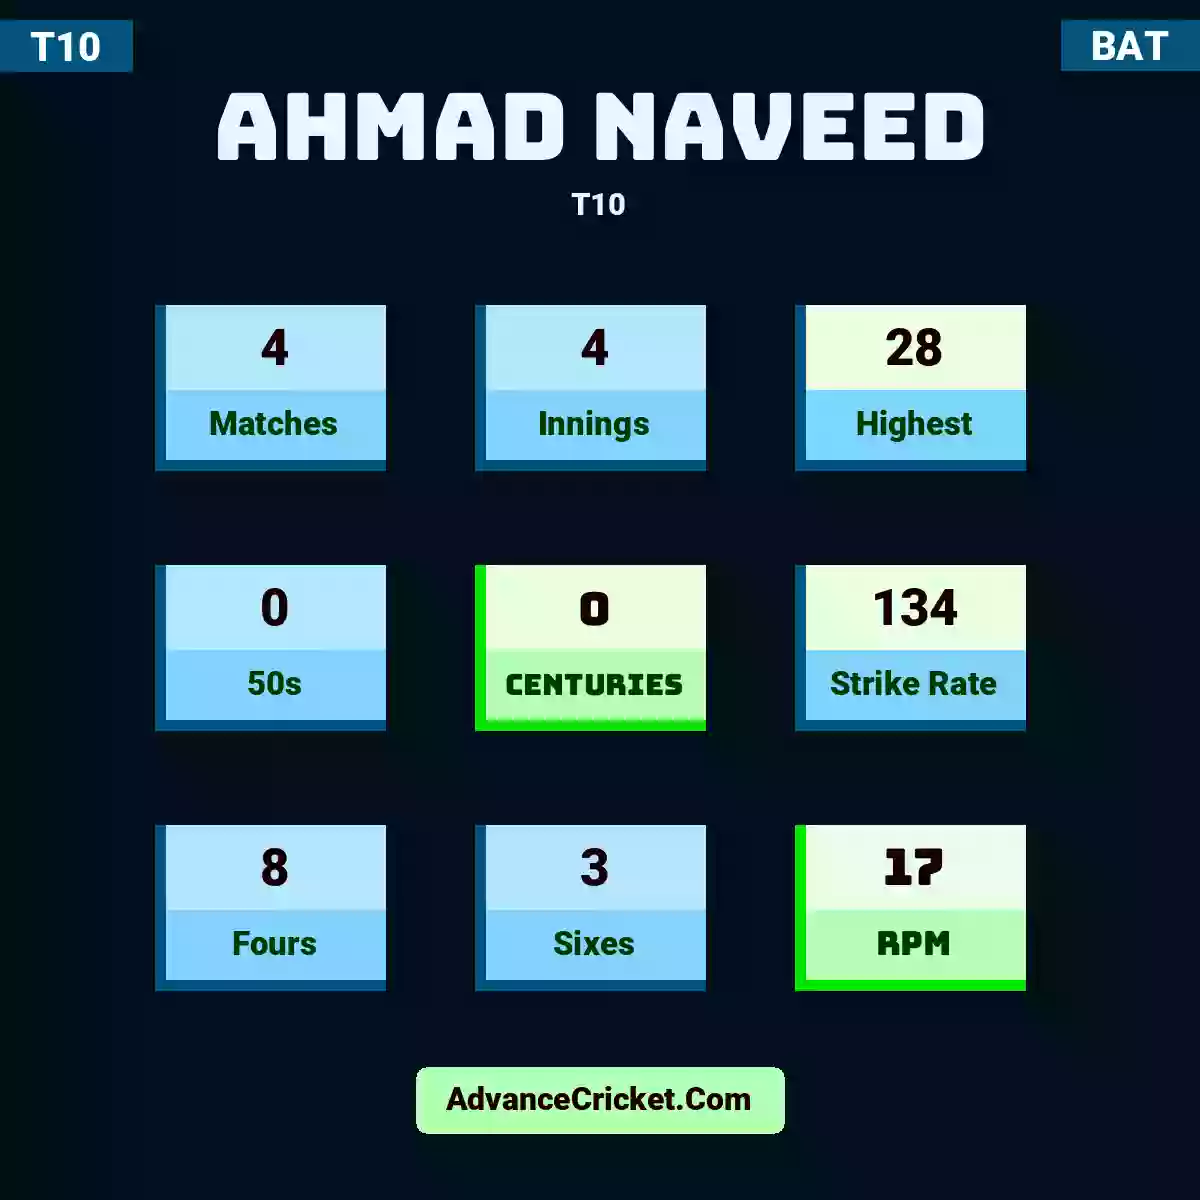 Ahmad Naveed T10 , Ahmad Naveed played 4 matches, scored 28 runs as highest, 0 half-centuries, and 0 centuries, with a strike rate of 134. A.Naveed hit 8 fours and 3 sixes, with an RPM of 17.